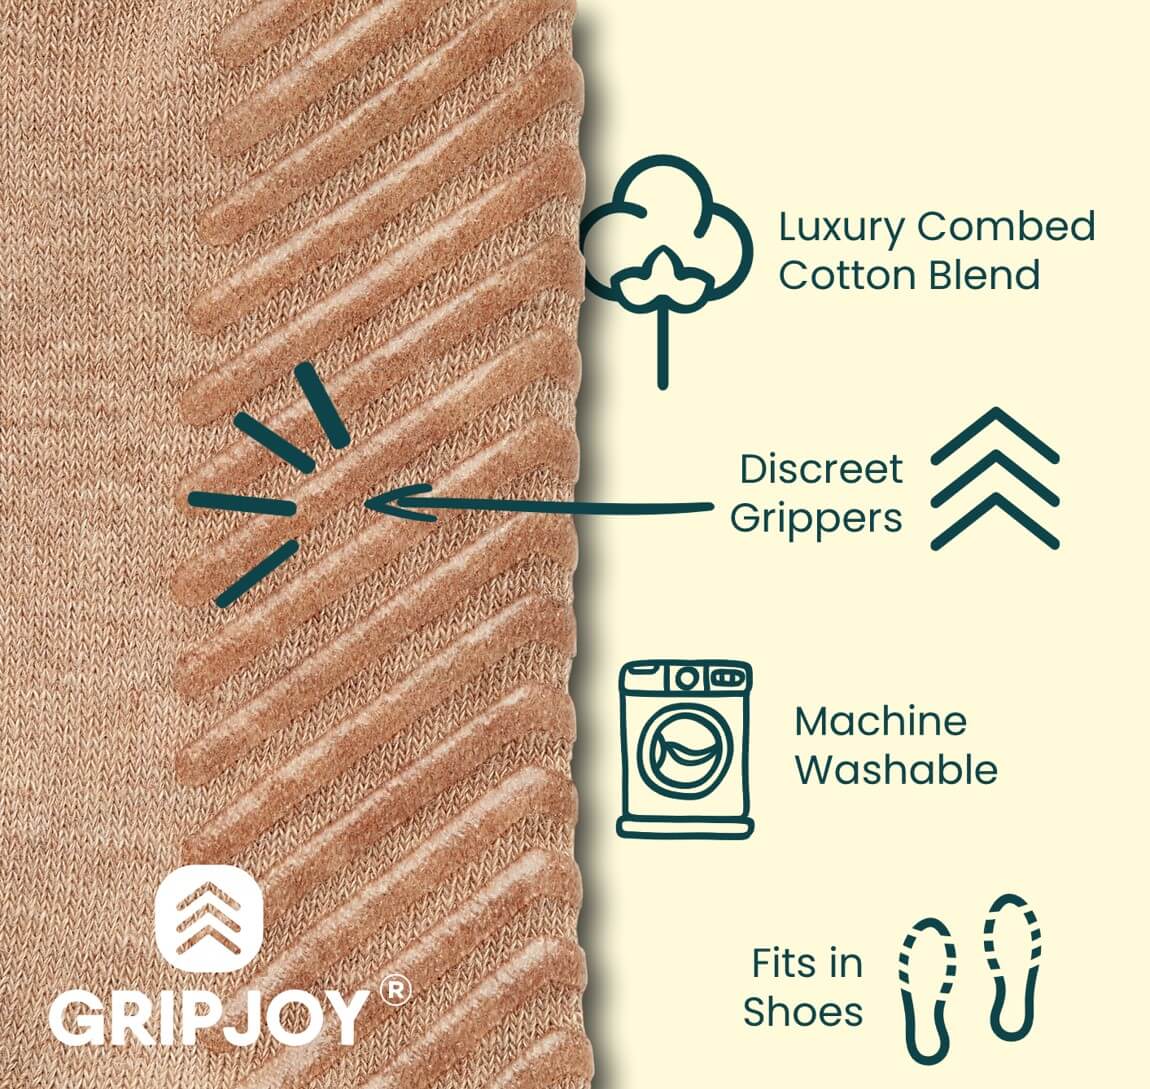  Gripjoy Non-Binding Diabetic Socks with Grippers - Loose  Fitting & Stretchy - Unisex - 3 Pairs, Black : Health & Household